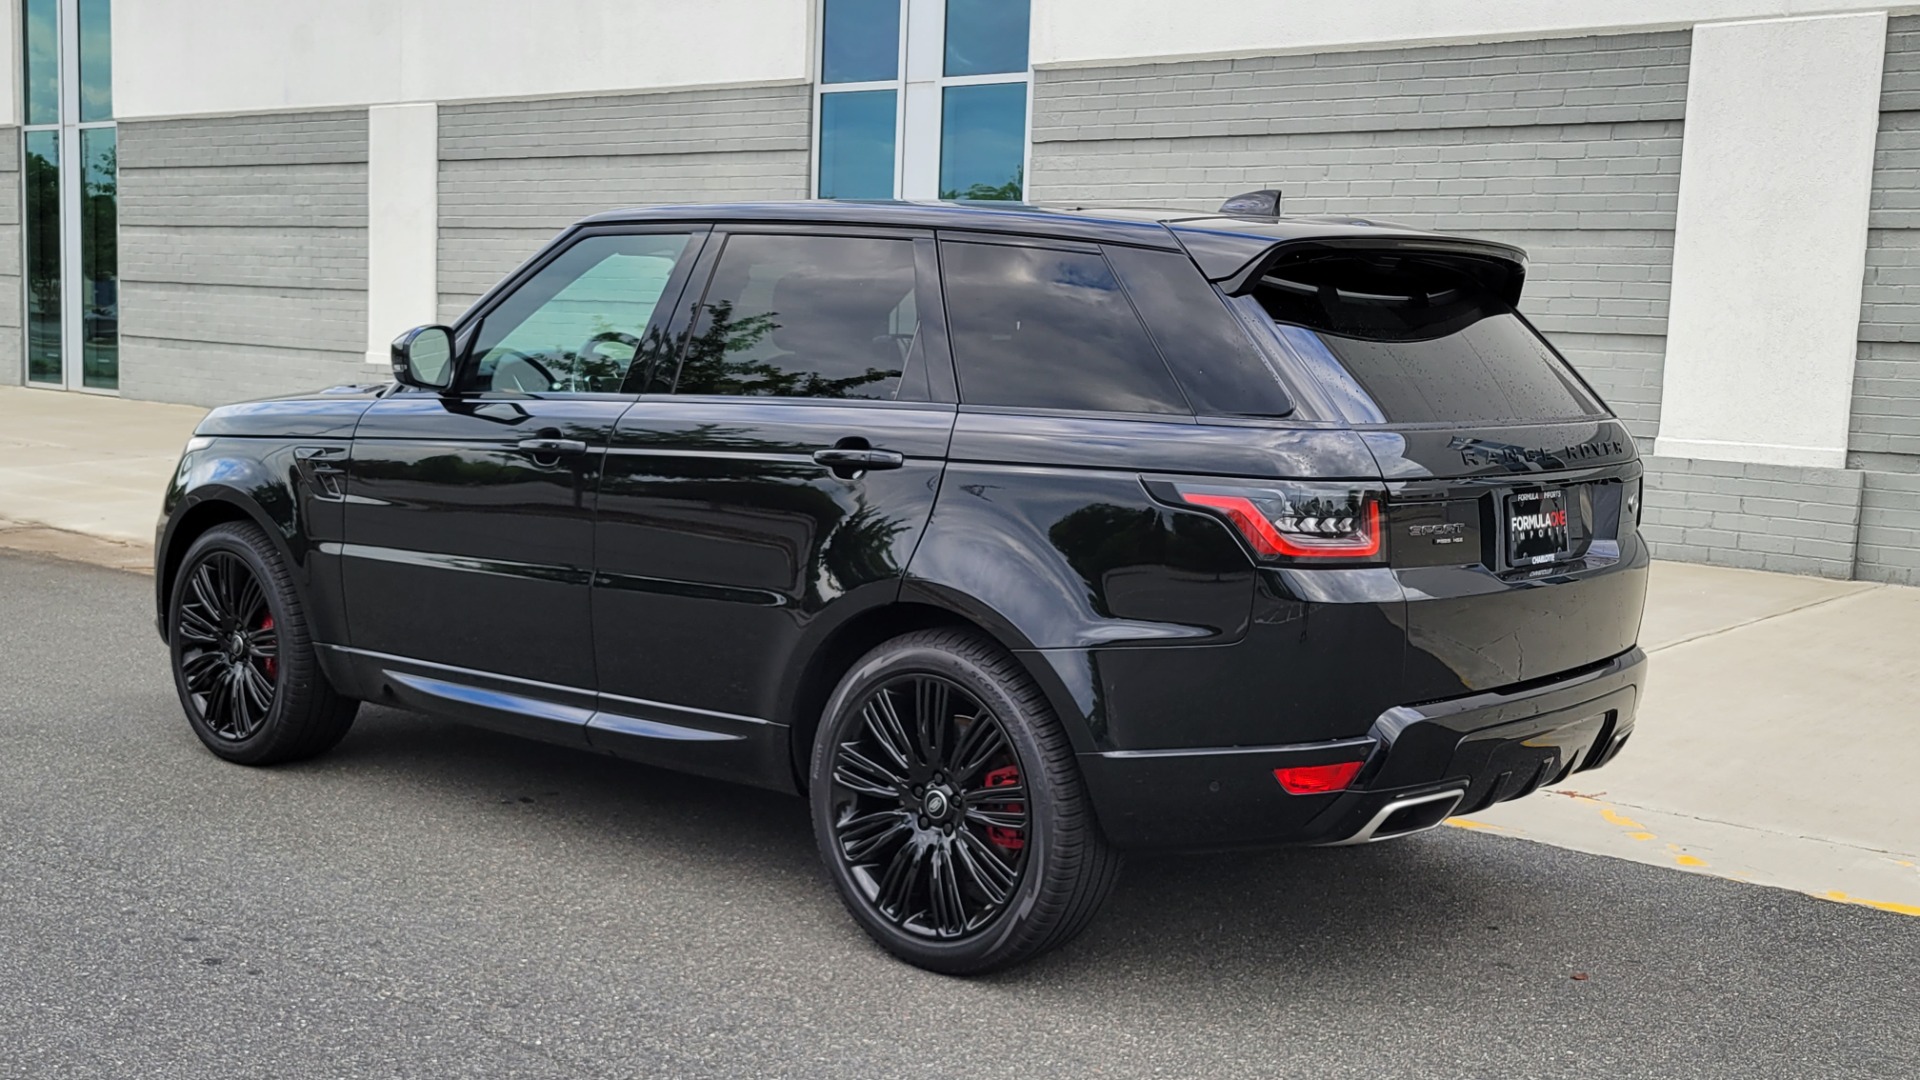 Used 2022 Land Rover RANGE ROVER SPORT HSE DYNAMIC 518HP / NAV / SUNROOF / MERIDIAN / CAMERA for sale $105,998 at Formula Imports in Charlotte NC 28227 6